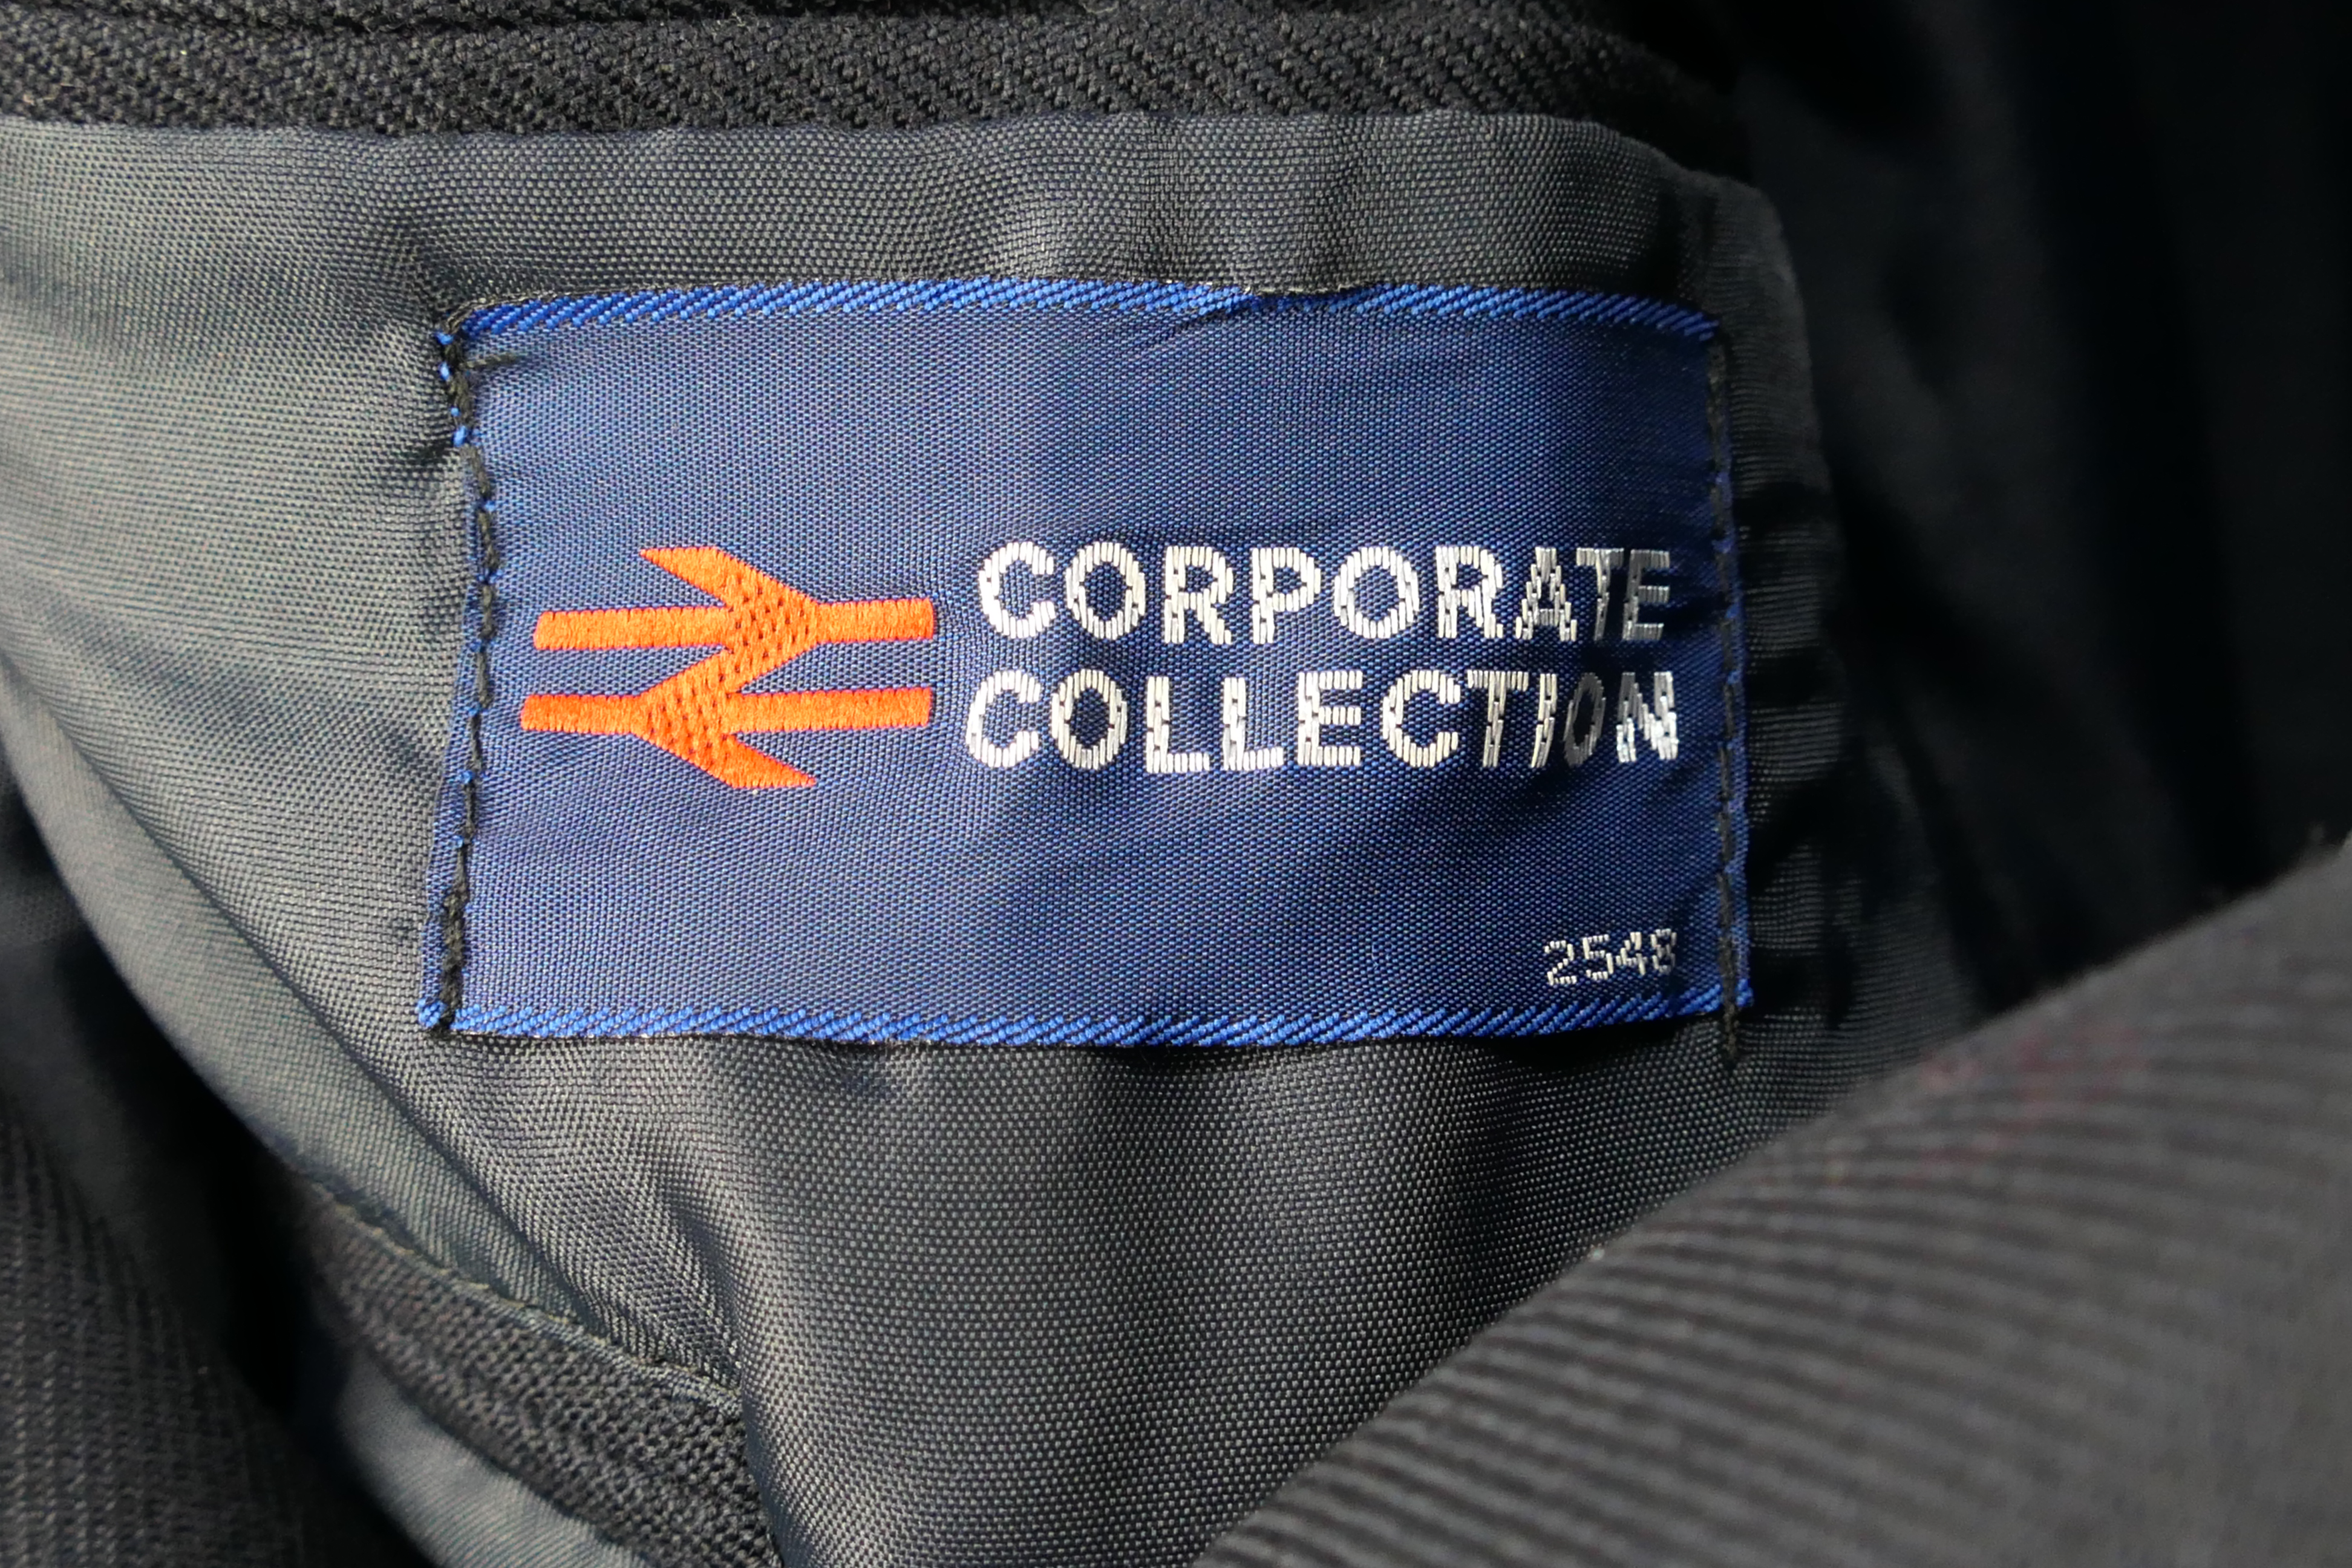 A vintage British Rail jacket with insig - Image 6 of 7